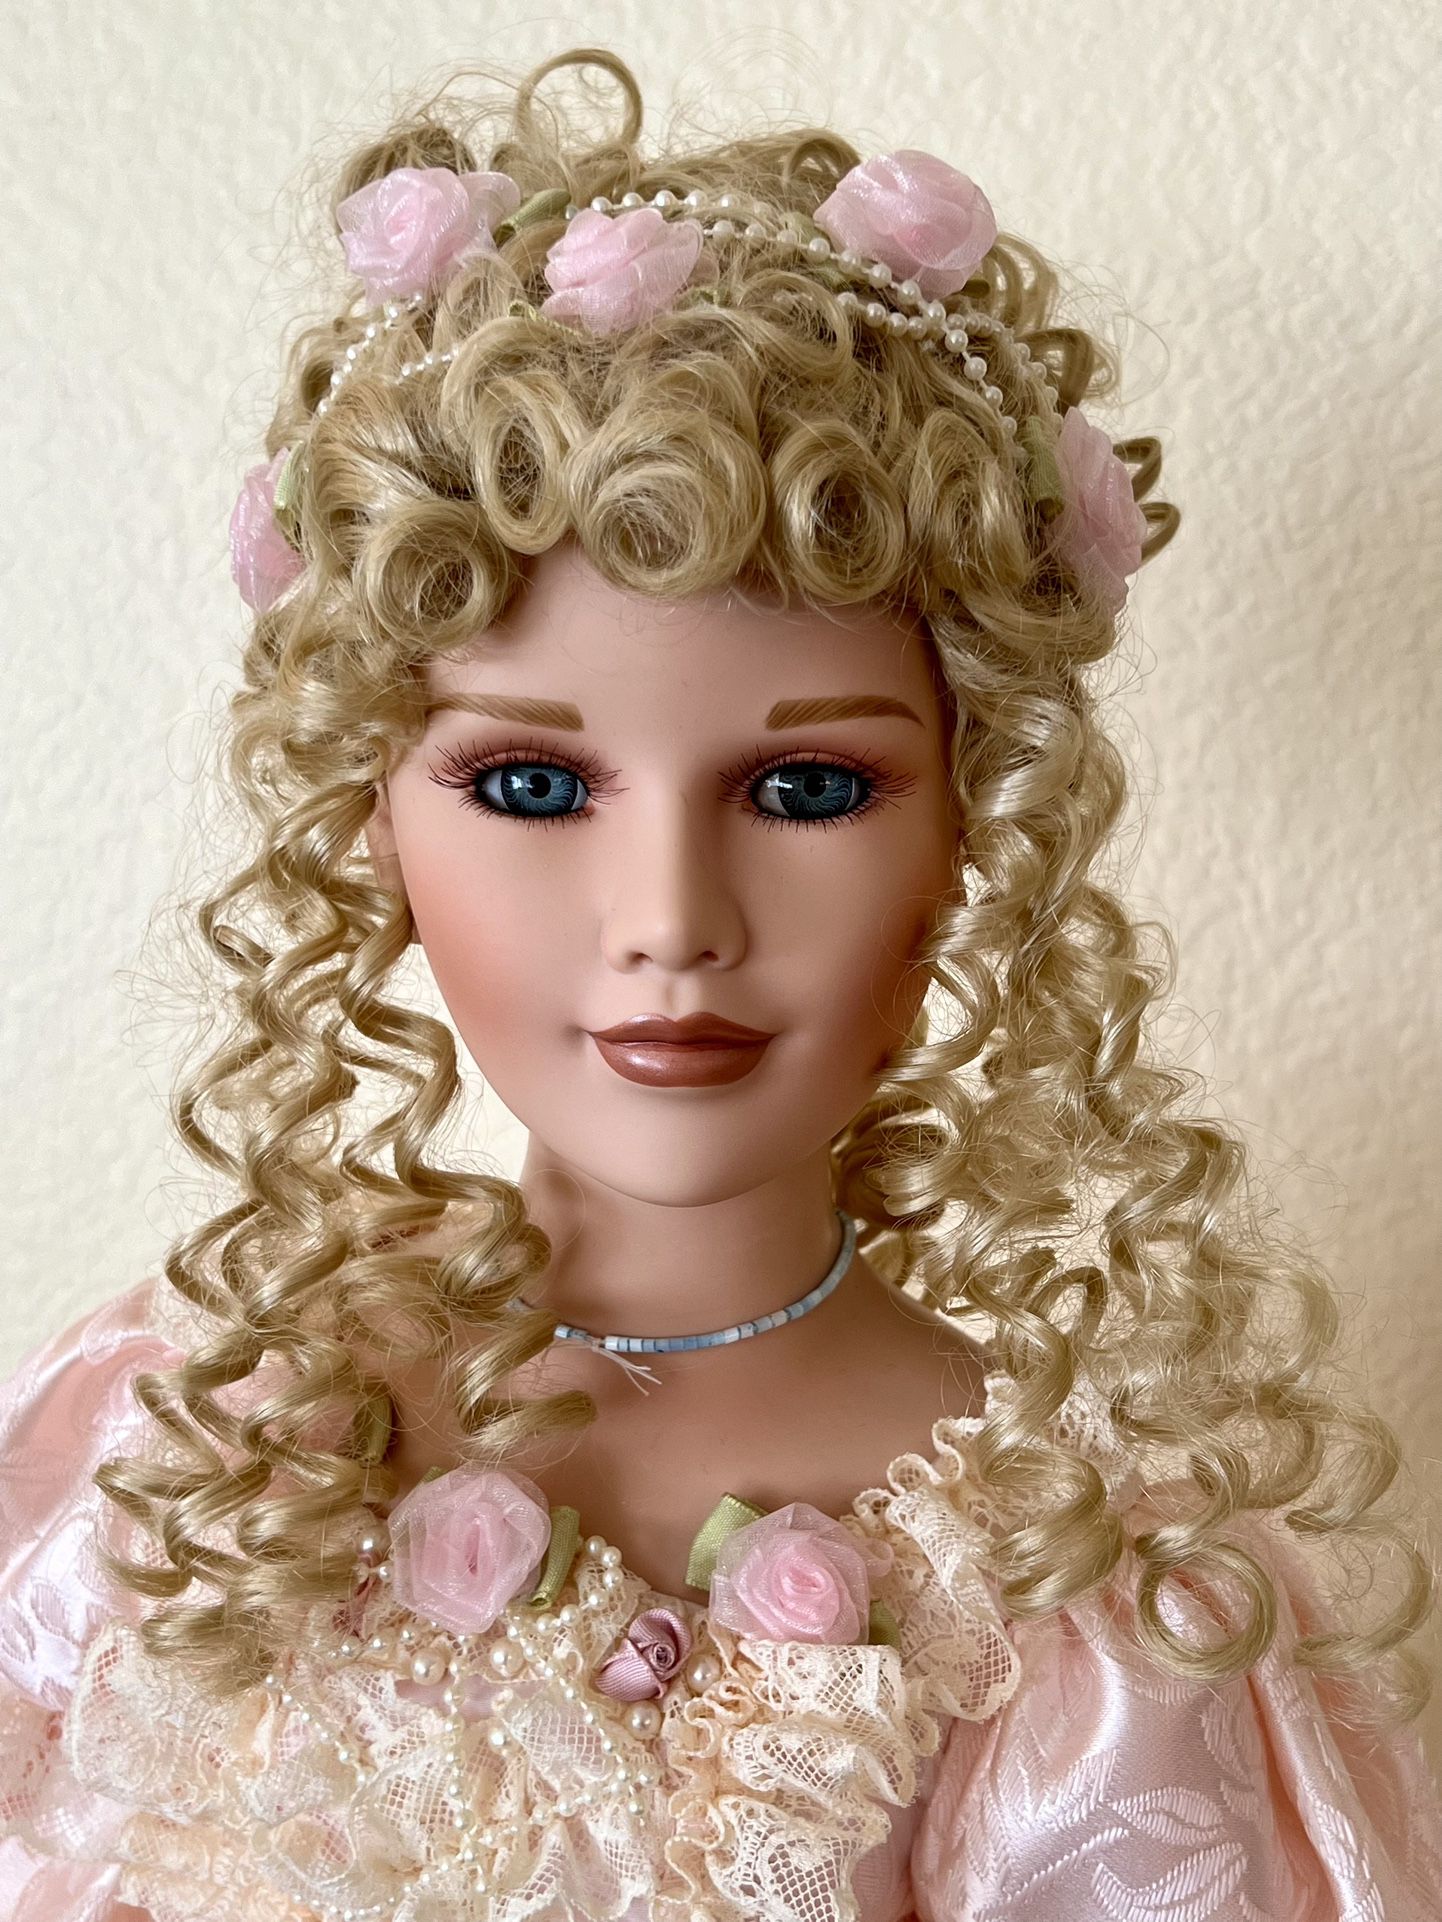 Collector’s Porcelain Doll “The Palmary Collection”